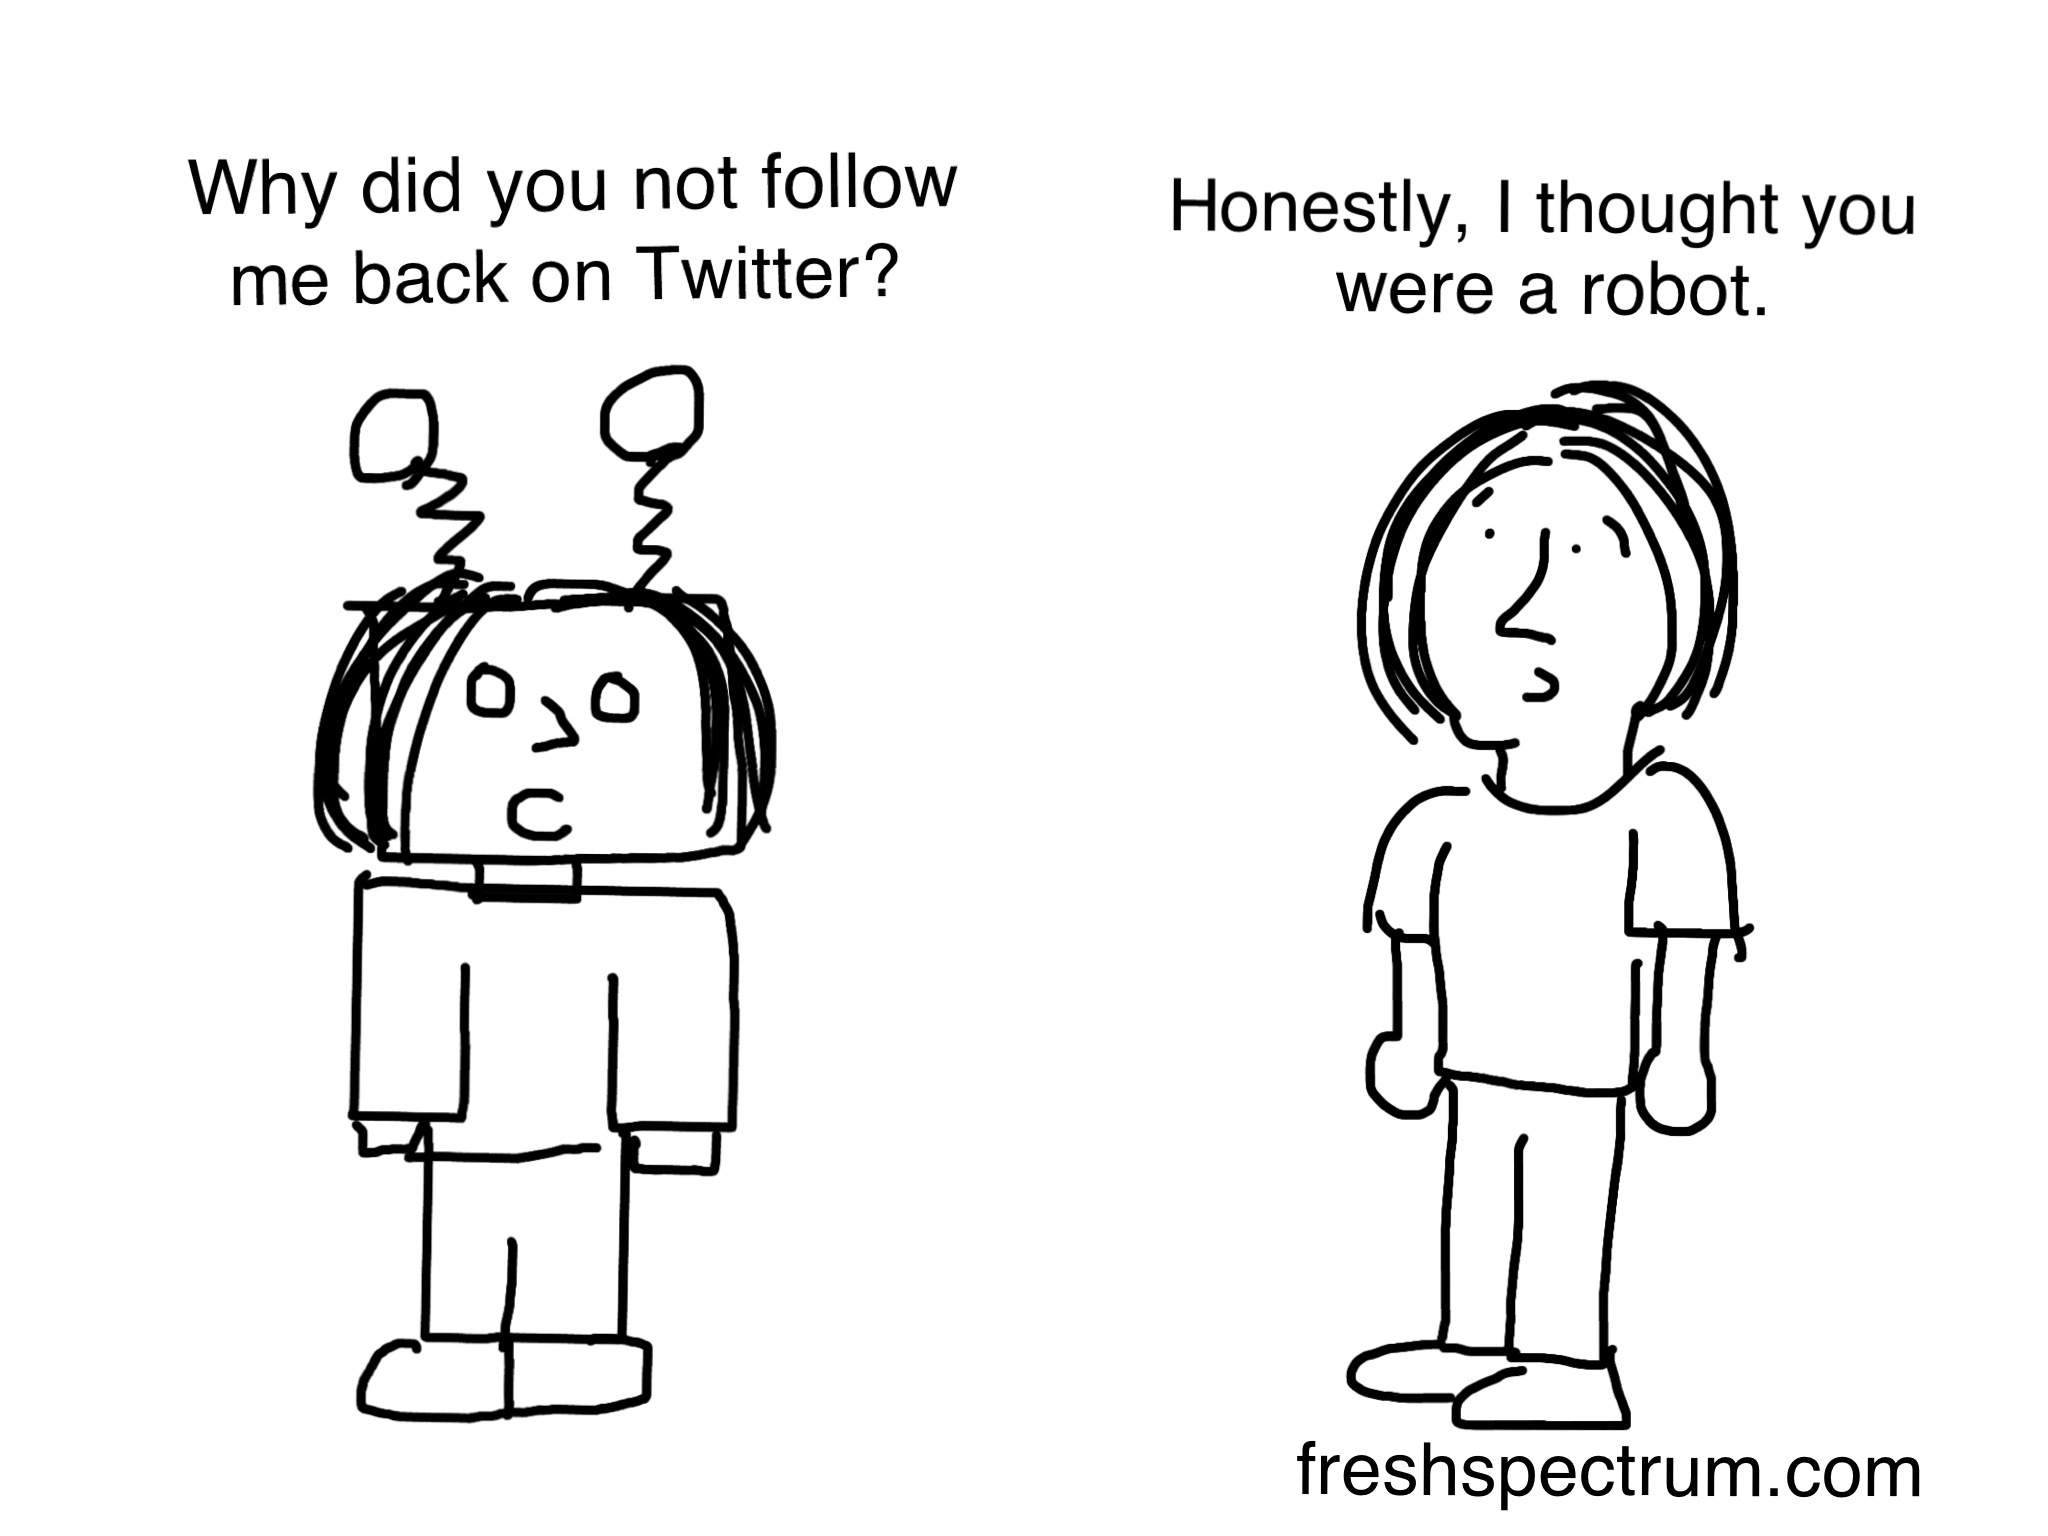 Cartoon: Person One: Why did you not follow me back on Twitter? Person Two: Honestly, I thought you were a robot.  Person One looks just like a robot.